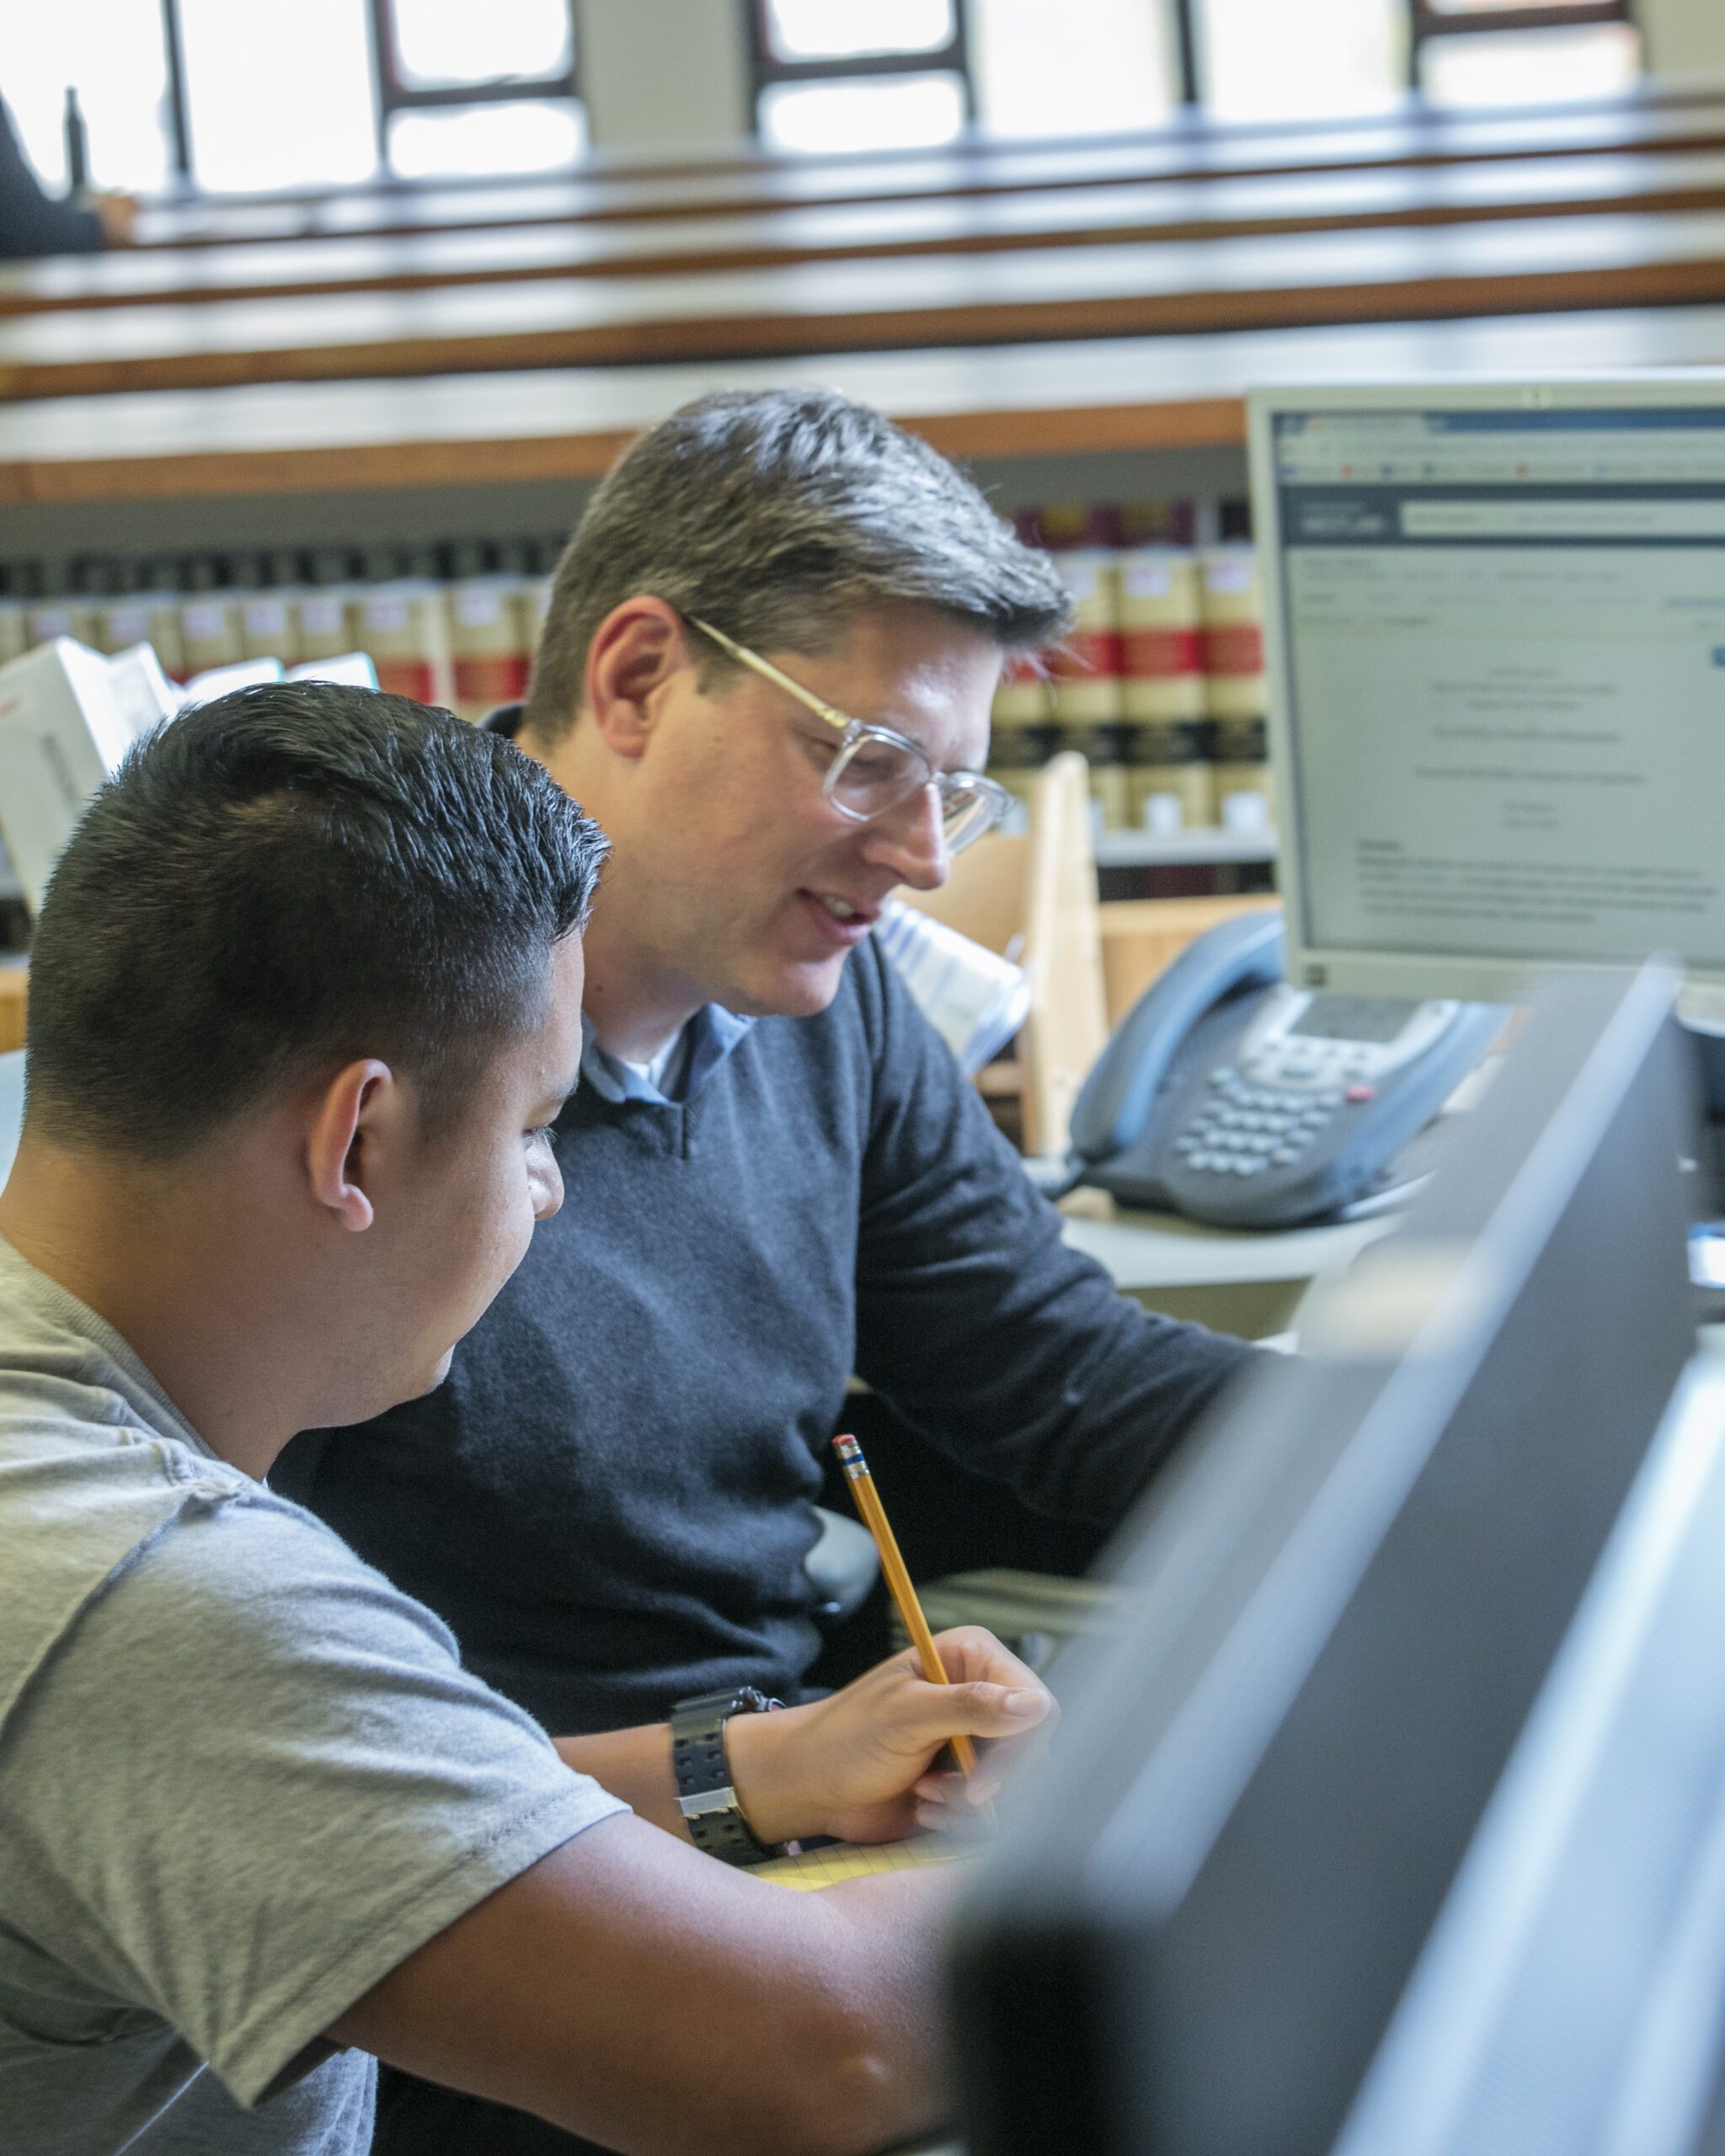 A librarian helping a student at the reference desk